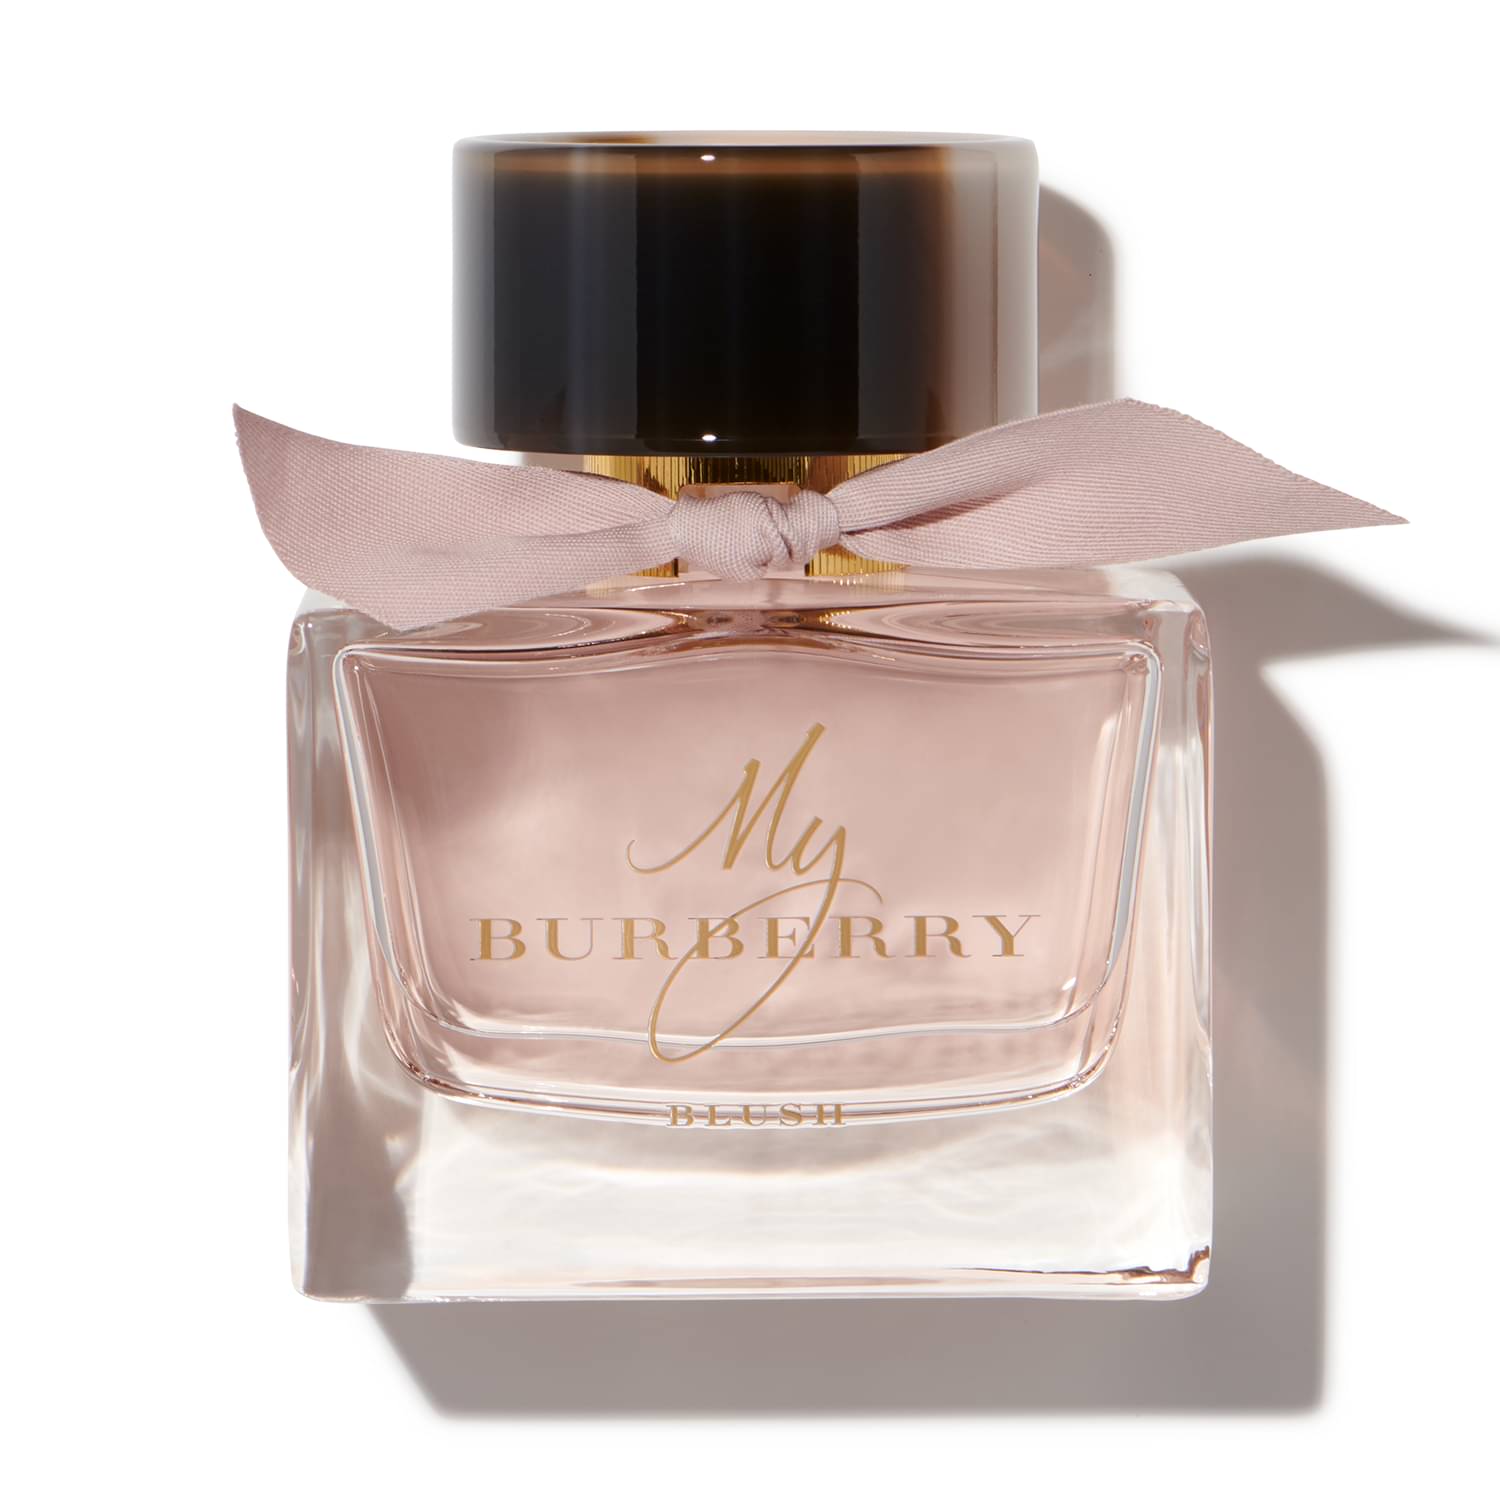 My Burberry Blush by Burberry $16.95/month | Scentbird